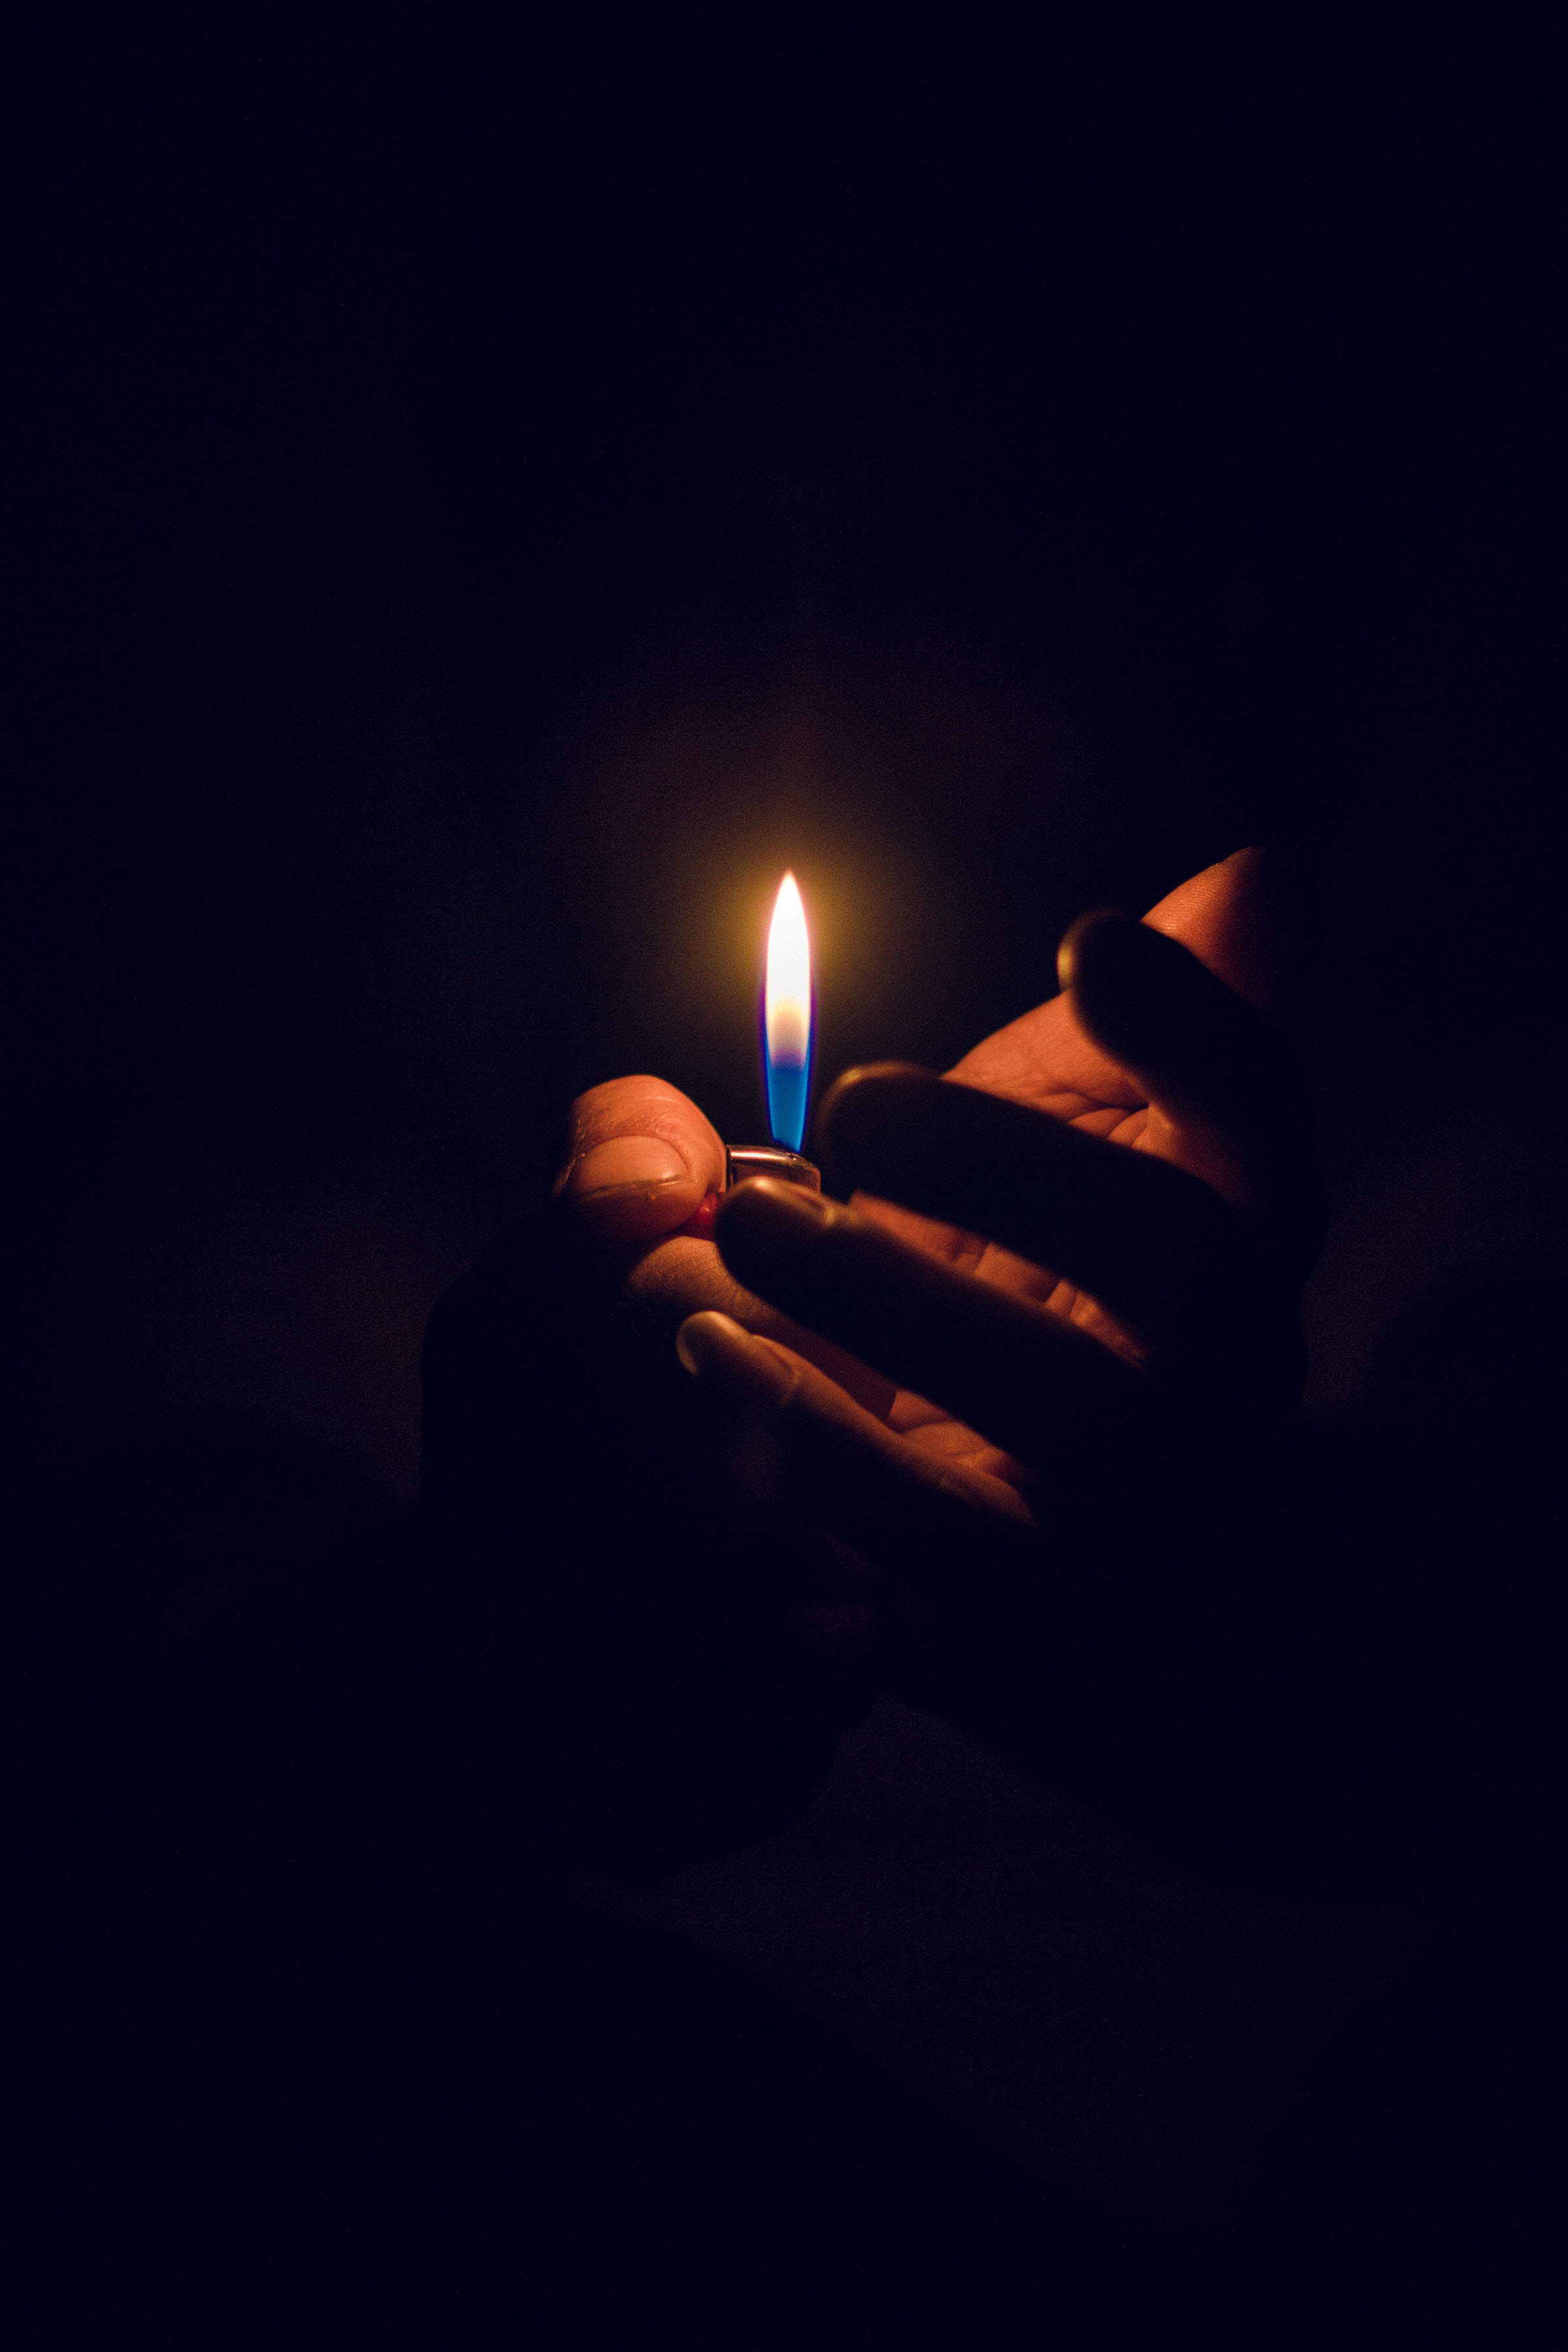 Black Background With Candle - Black Wallpaper HD-mncb.edu.vn